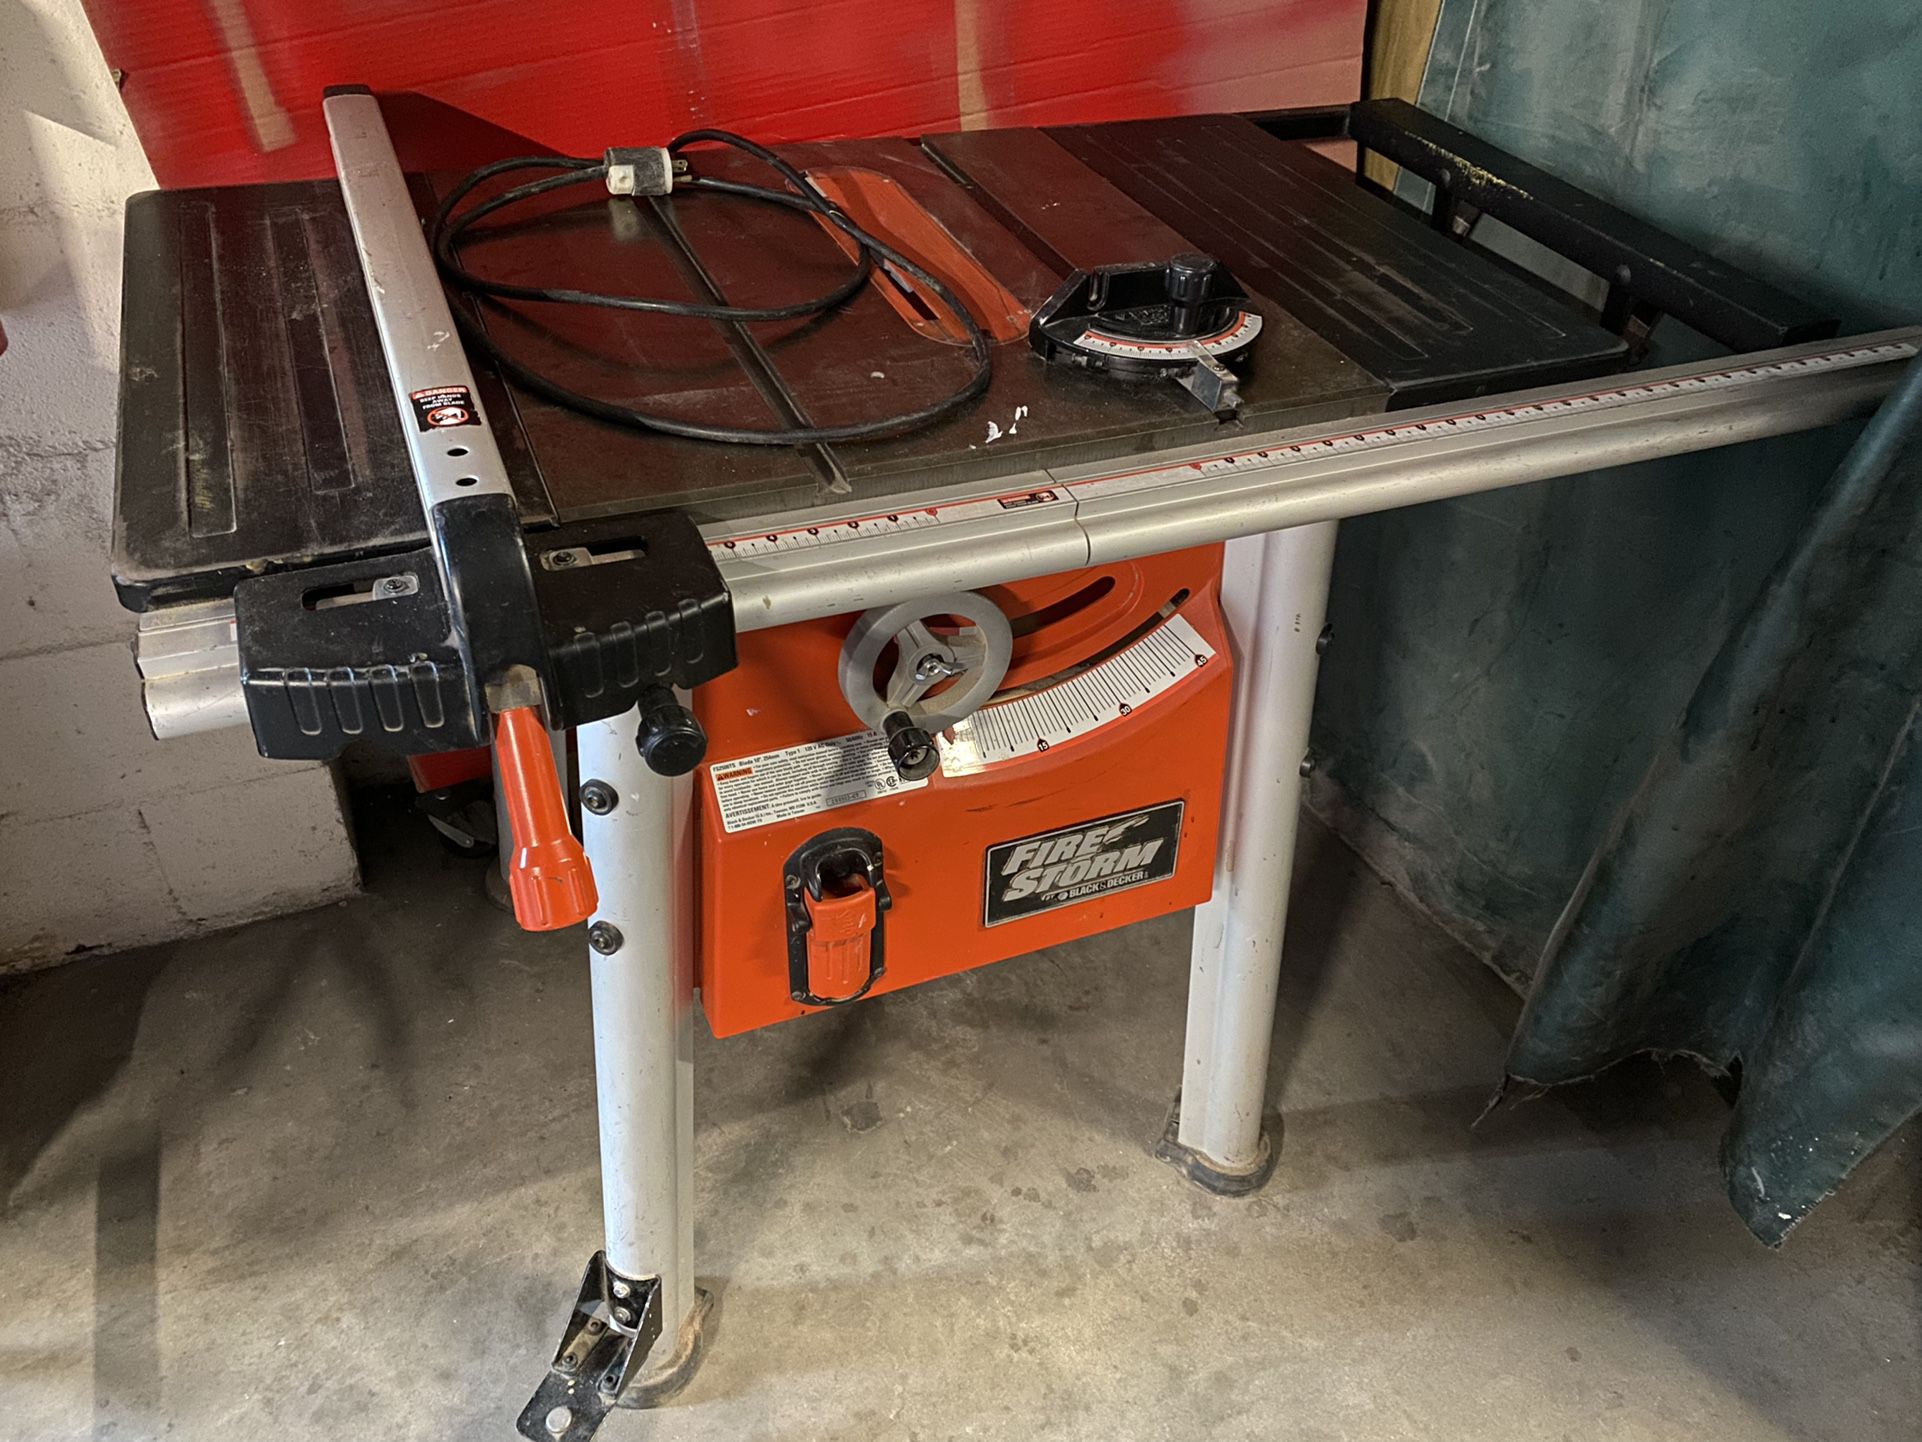 Black & Decker Firestorm Used Full Size Table saw. for Sale in